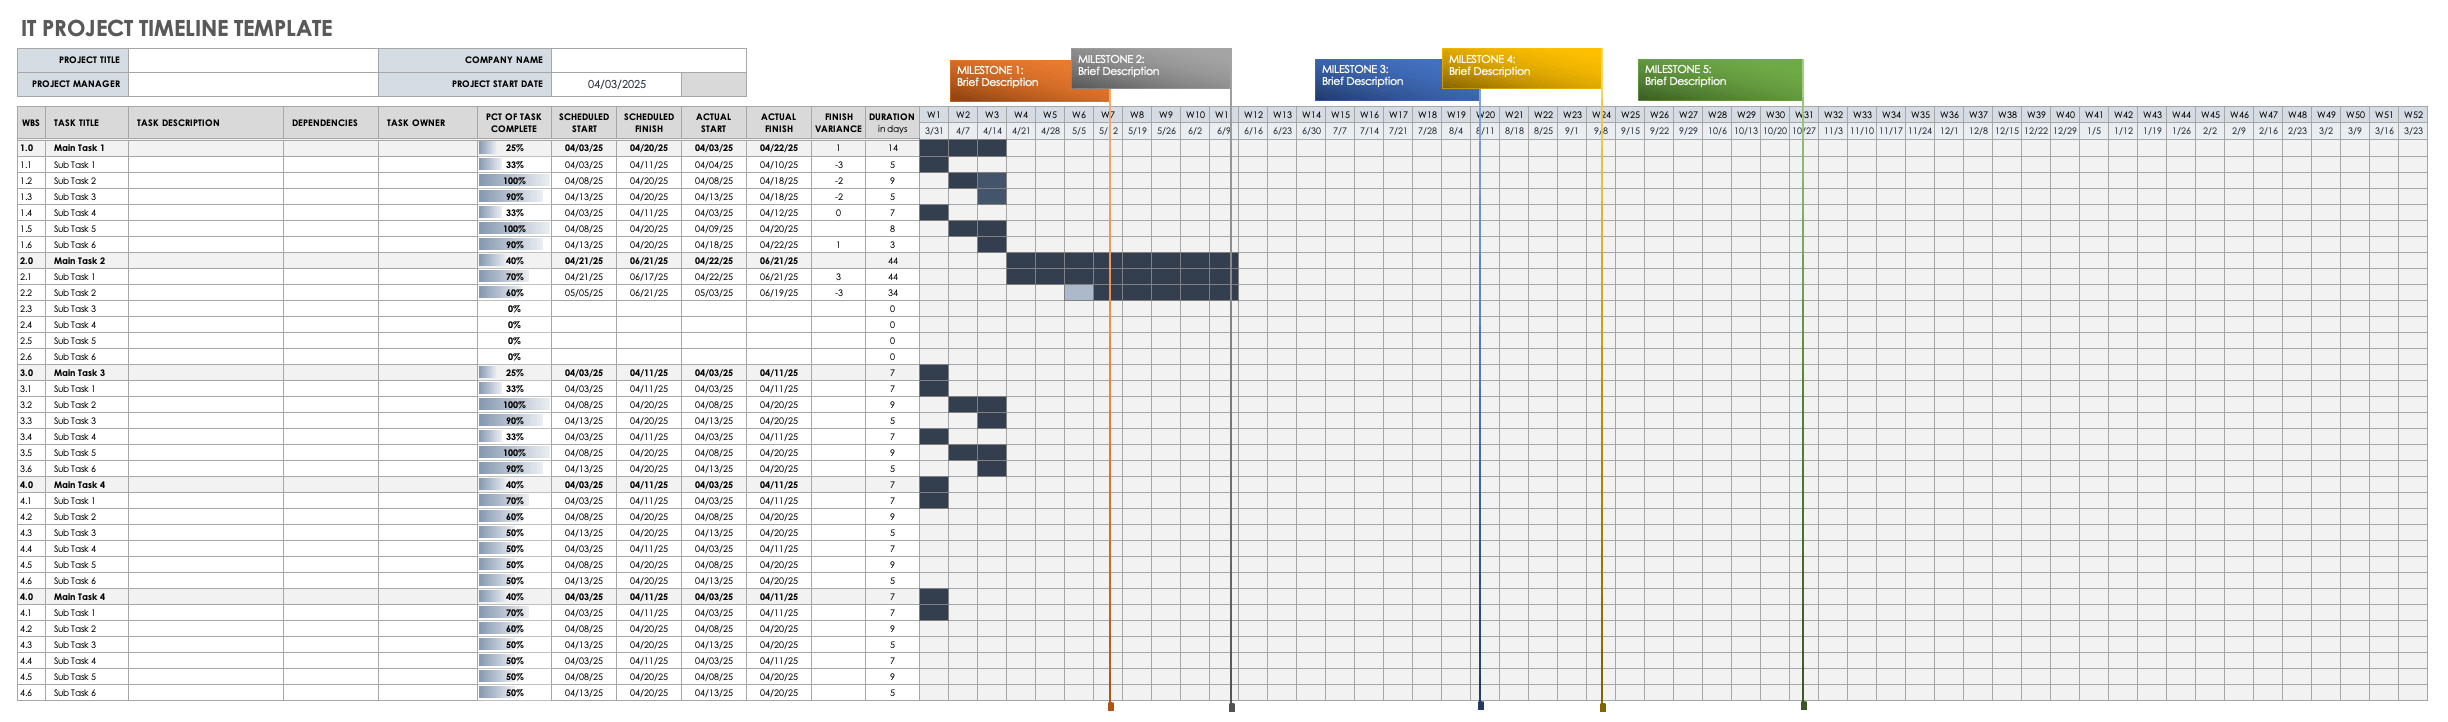 IT Project Timeline Template Excel